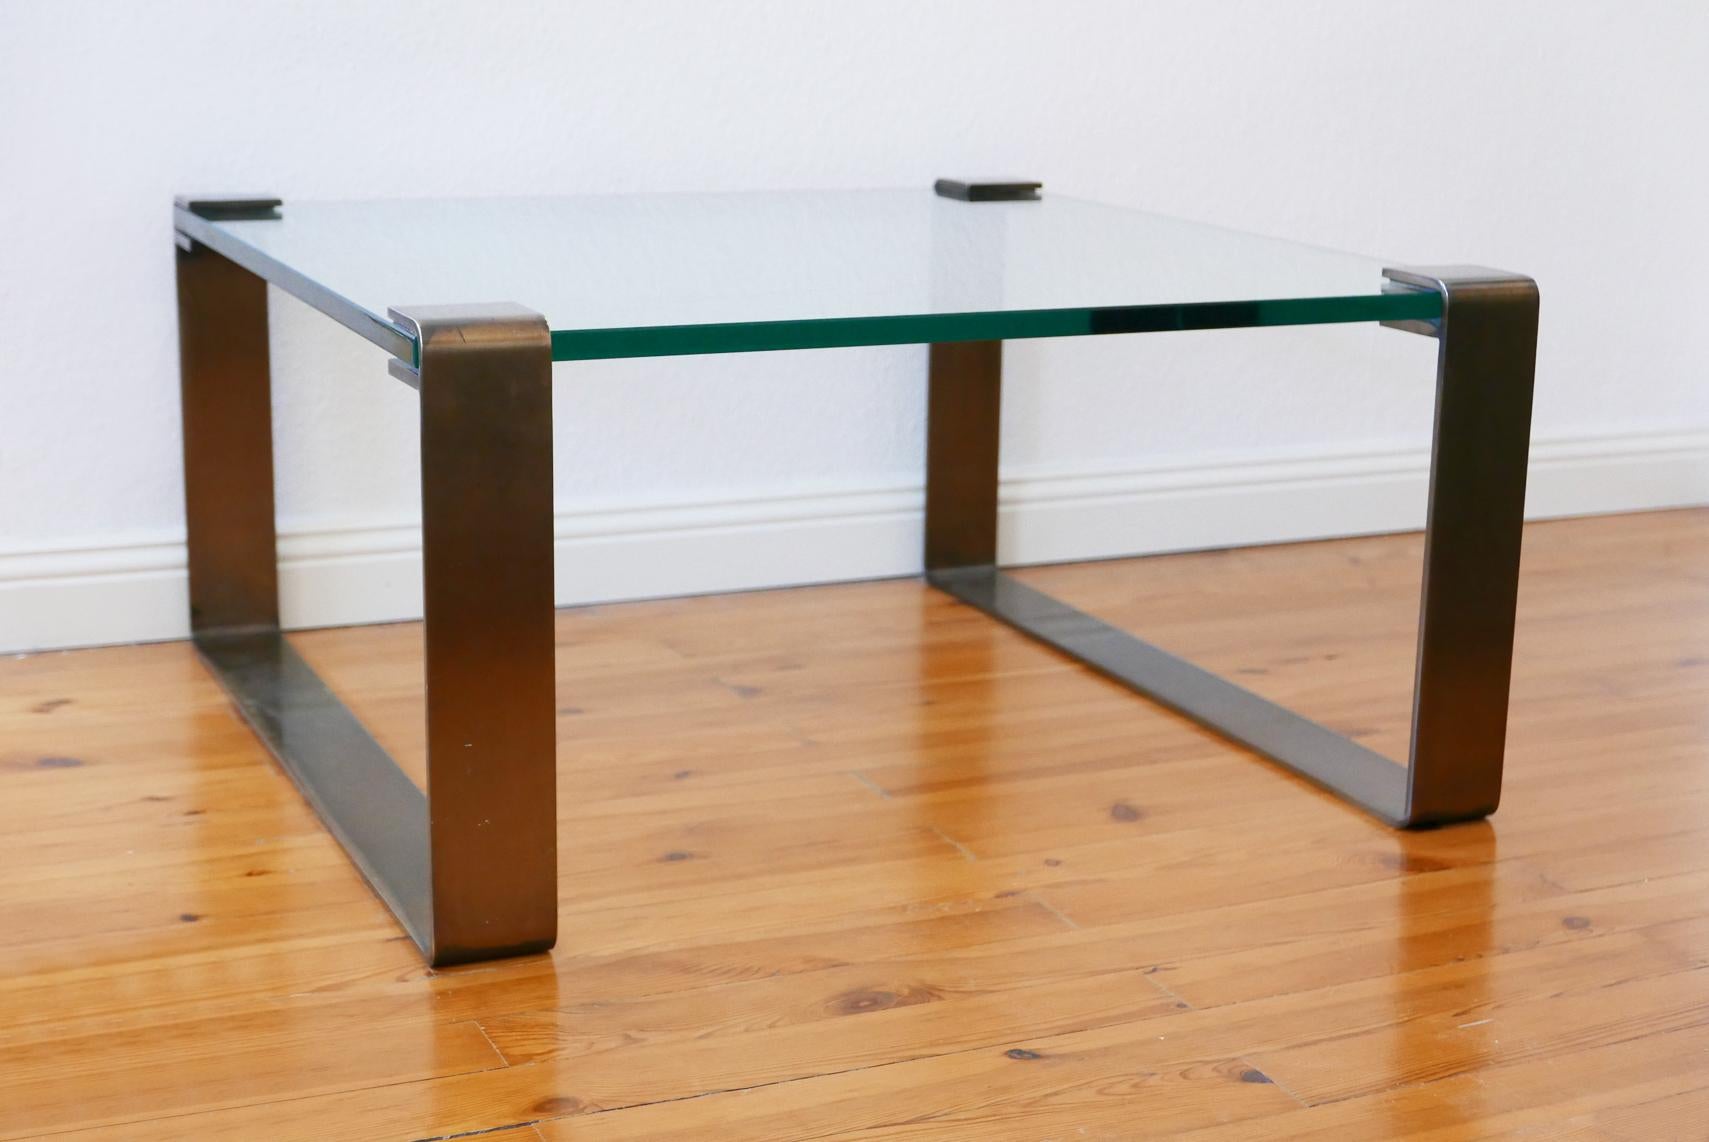 Elegant Mid-Century Modern coffee table. Model 'Klassik 1022' with bronze anodized base. Designed by Peter Draenert for Draenert, 1960s, Germany.

Executed in bronze anodized steel base and thick glass plate. This is a very rare execution of the